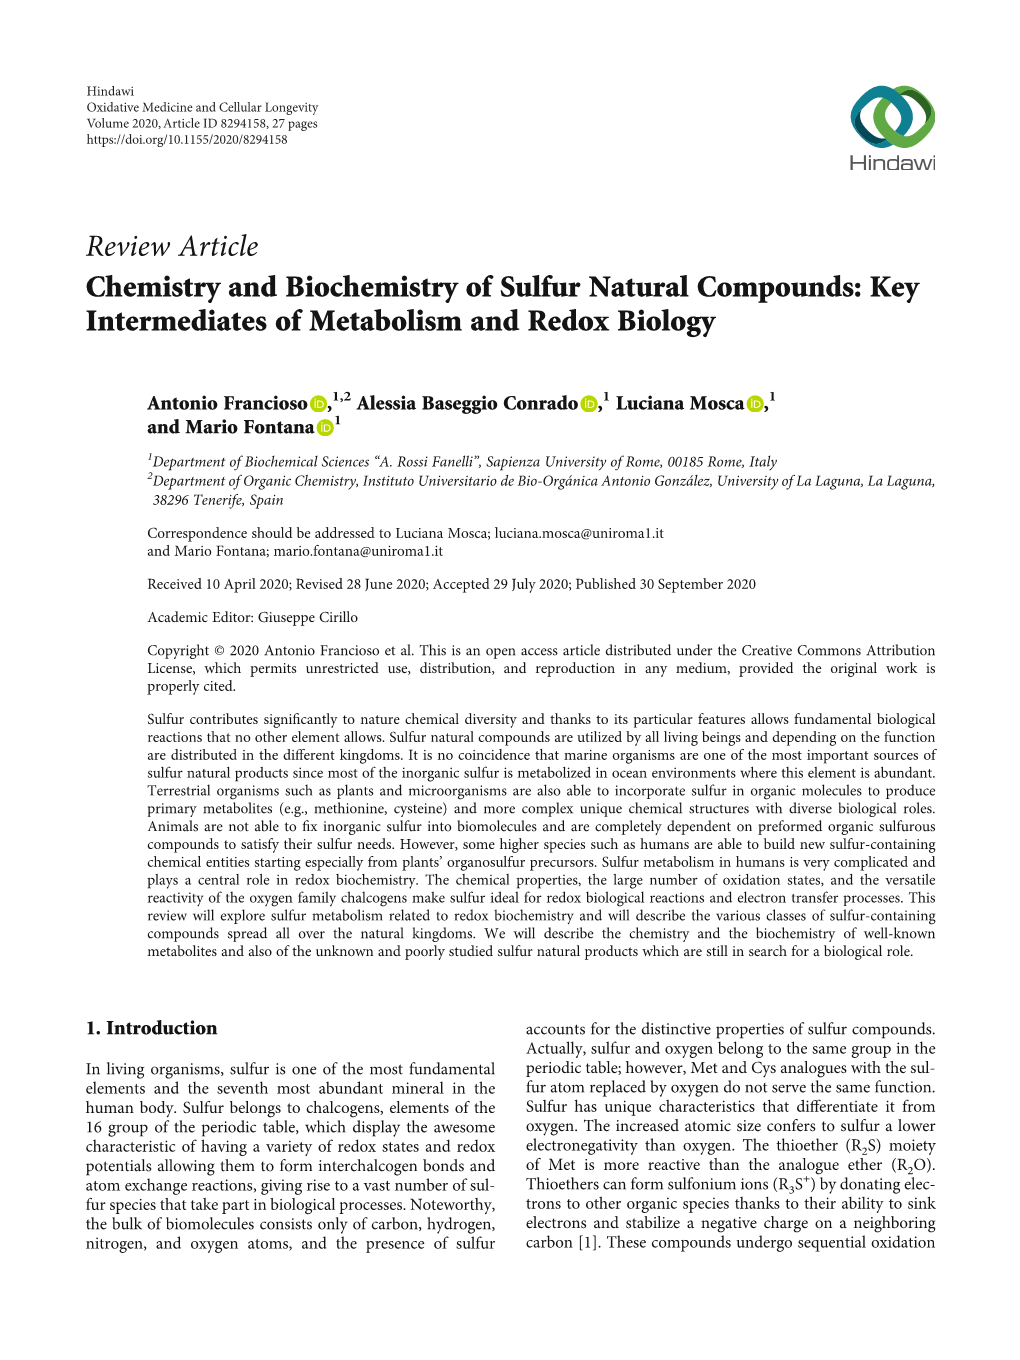 Chemistry and Biochemistry of Sulfur Natural Compounds: Key Intermediates of Metabolism and Redox Biology